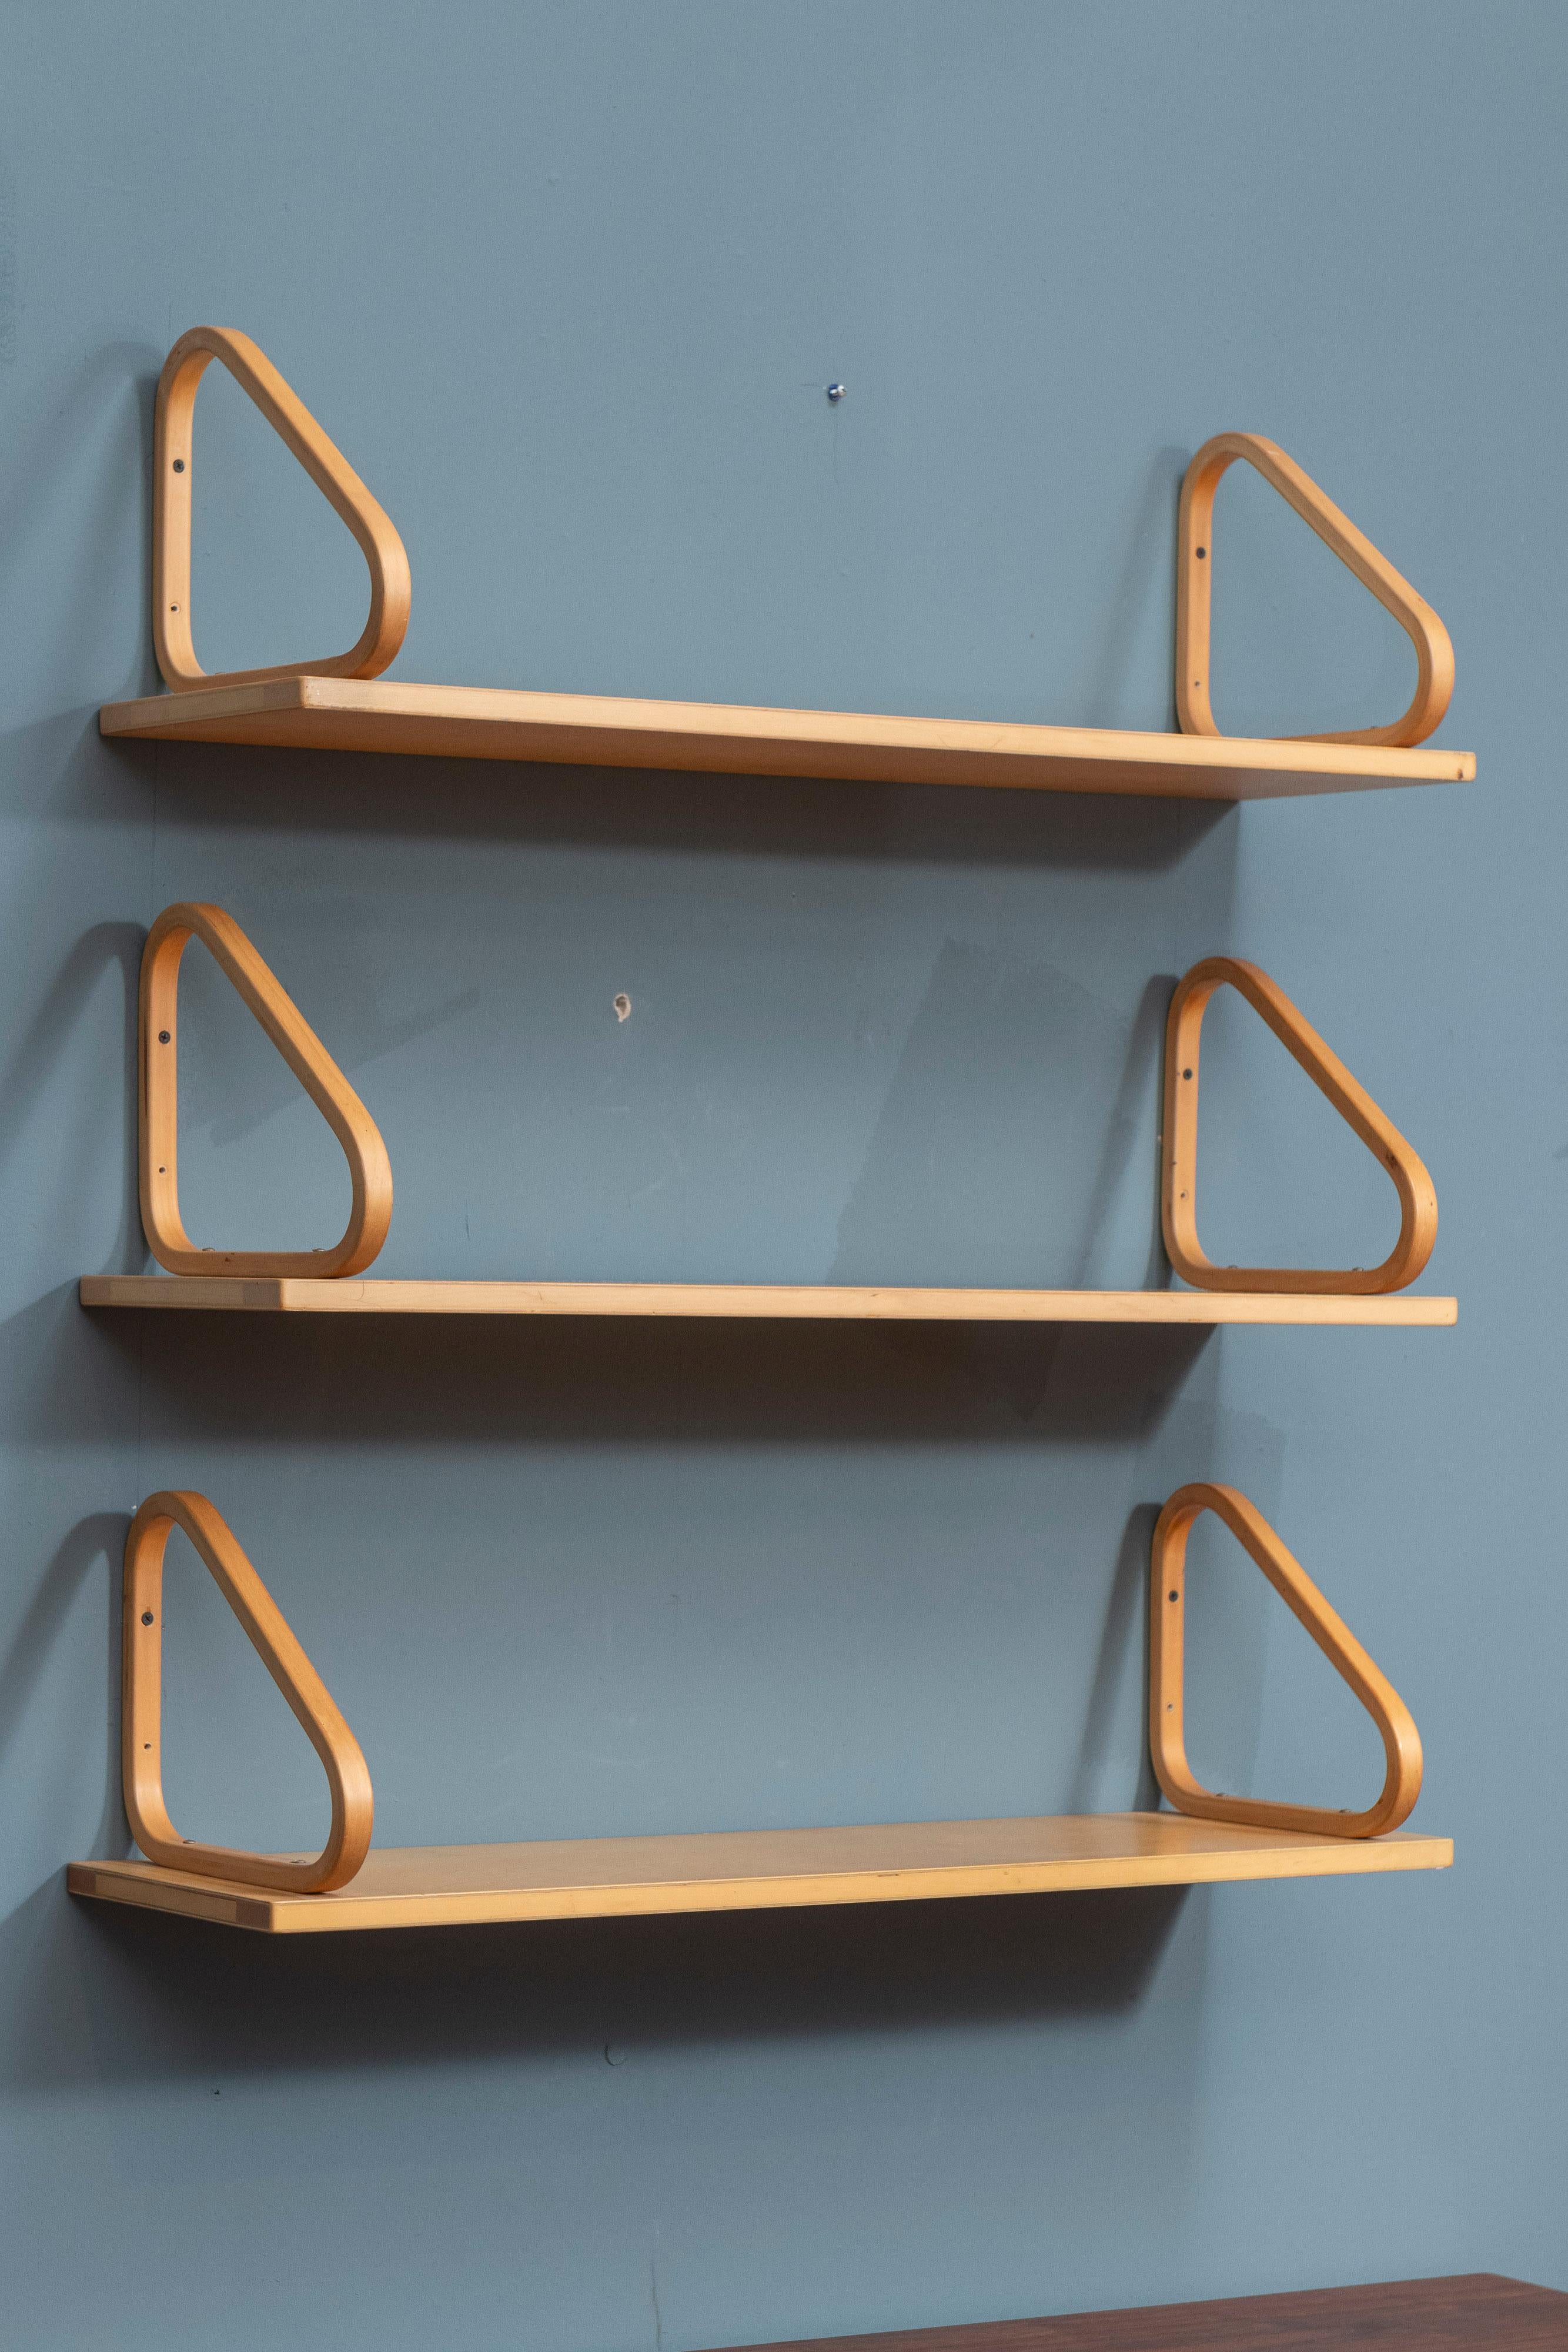 Alvar Aalto design wall shelves, model 112b. Super simple yet sophisticated shelves that are timeless classics by one of the masters of Scandinavian design. Warm patina with age appropriate wear but still present very well and ready to be installed